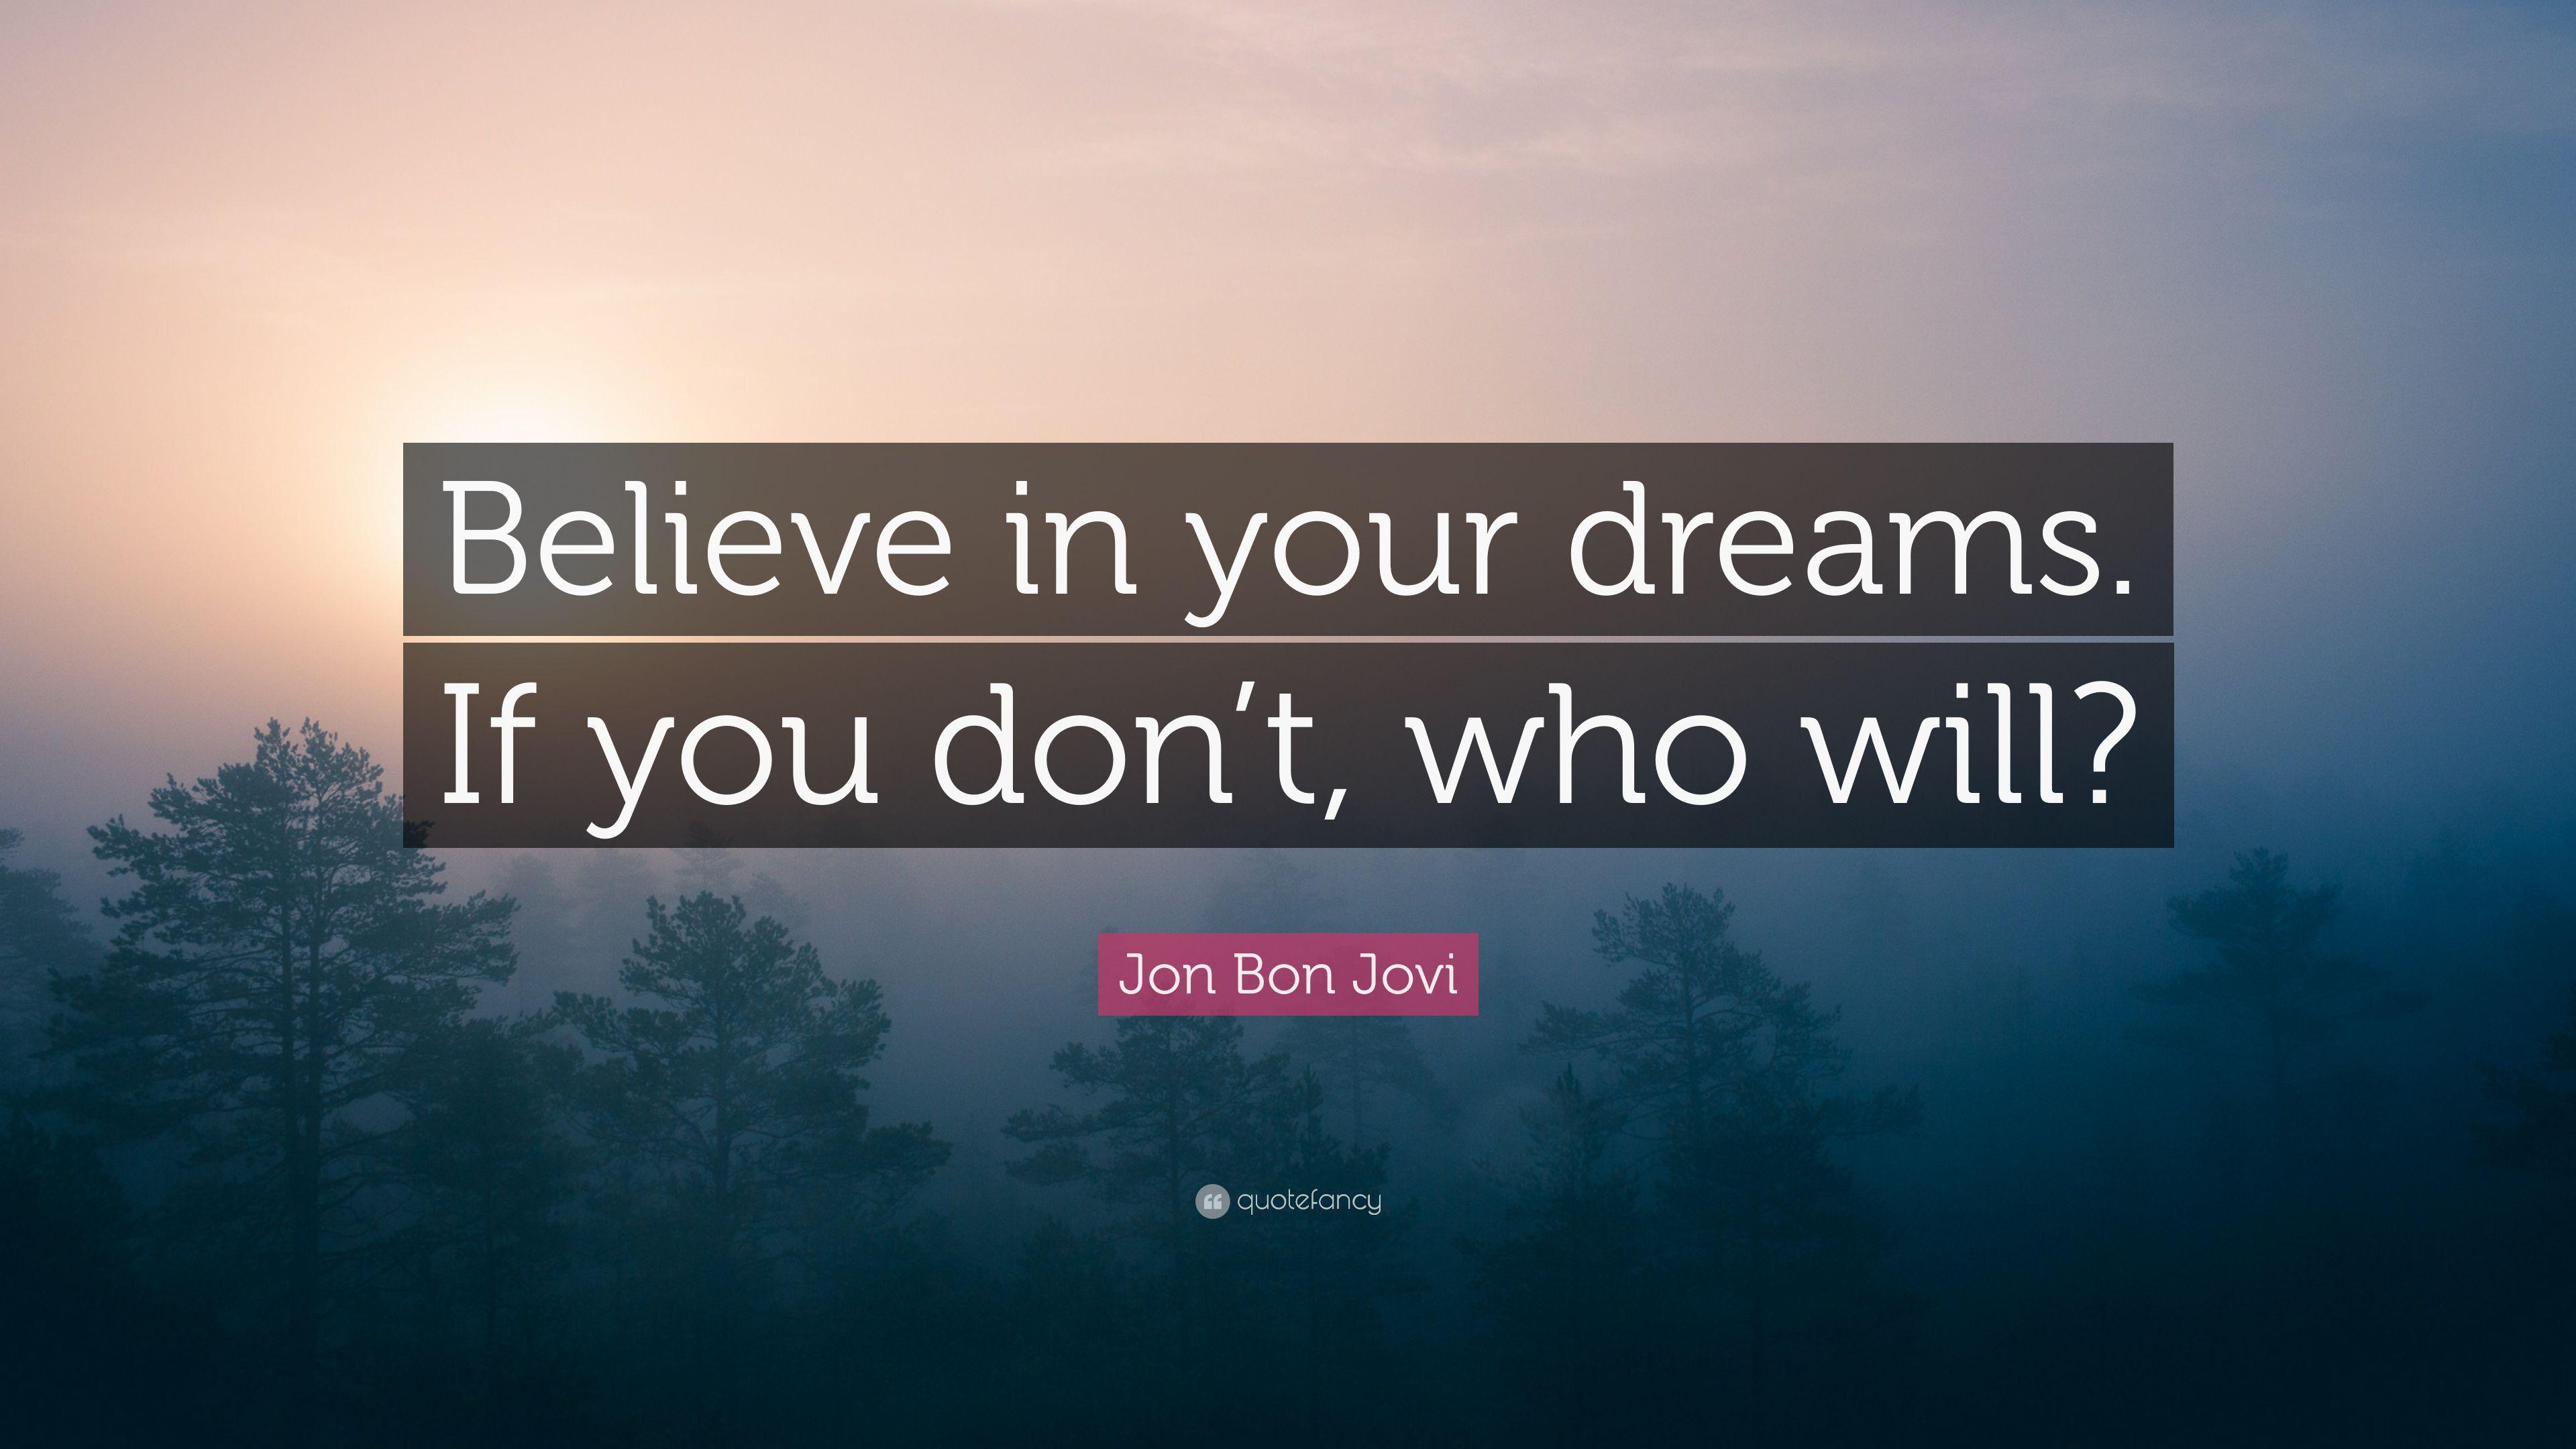 Jon Bon Jovi Quote: “Believe in your dreams. If you don't, who will